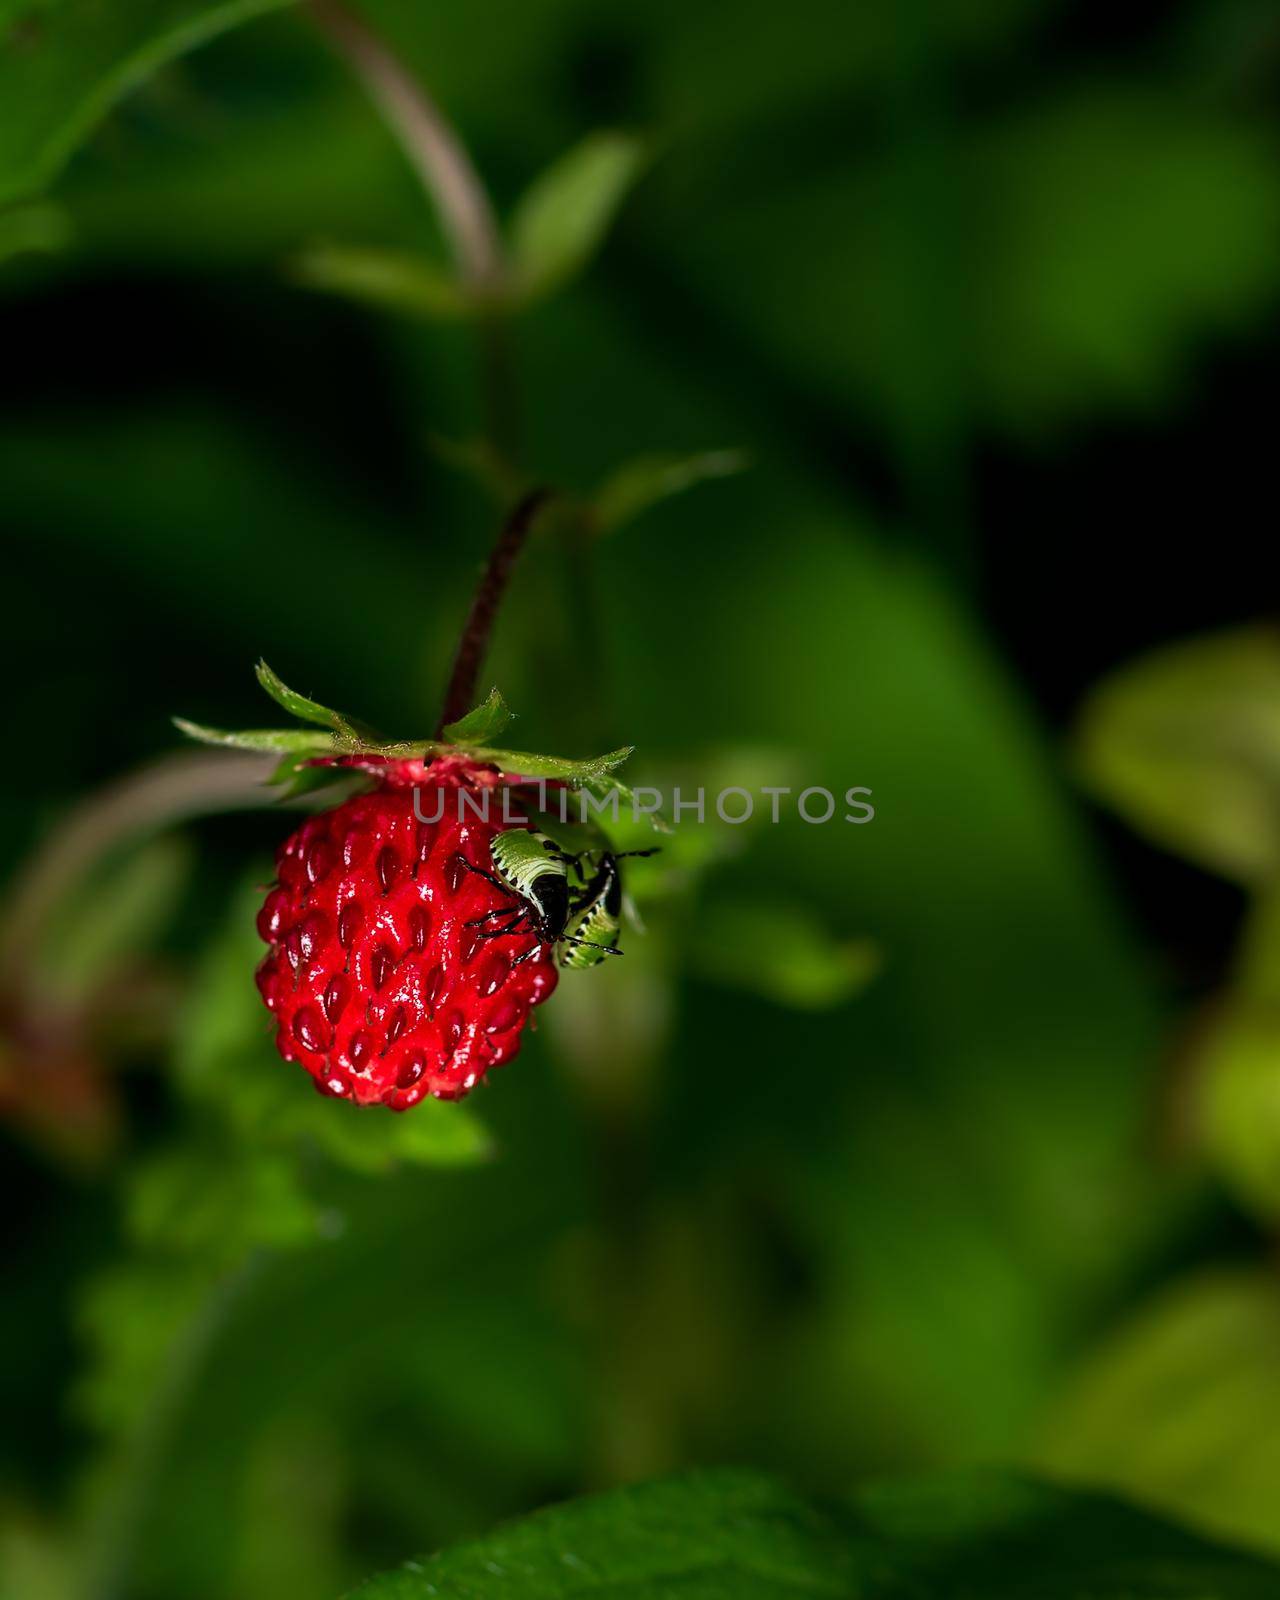 Bugs eating forest strawberry, close-up photo of a first fruit  